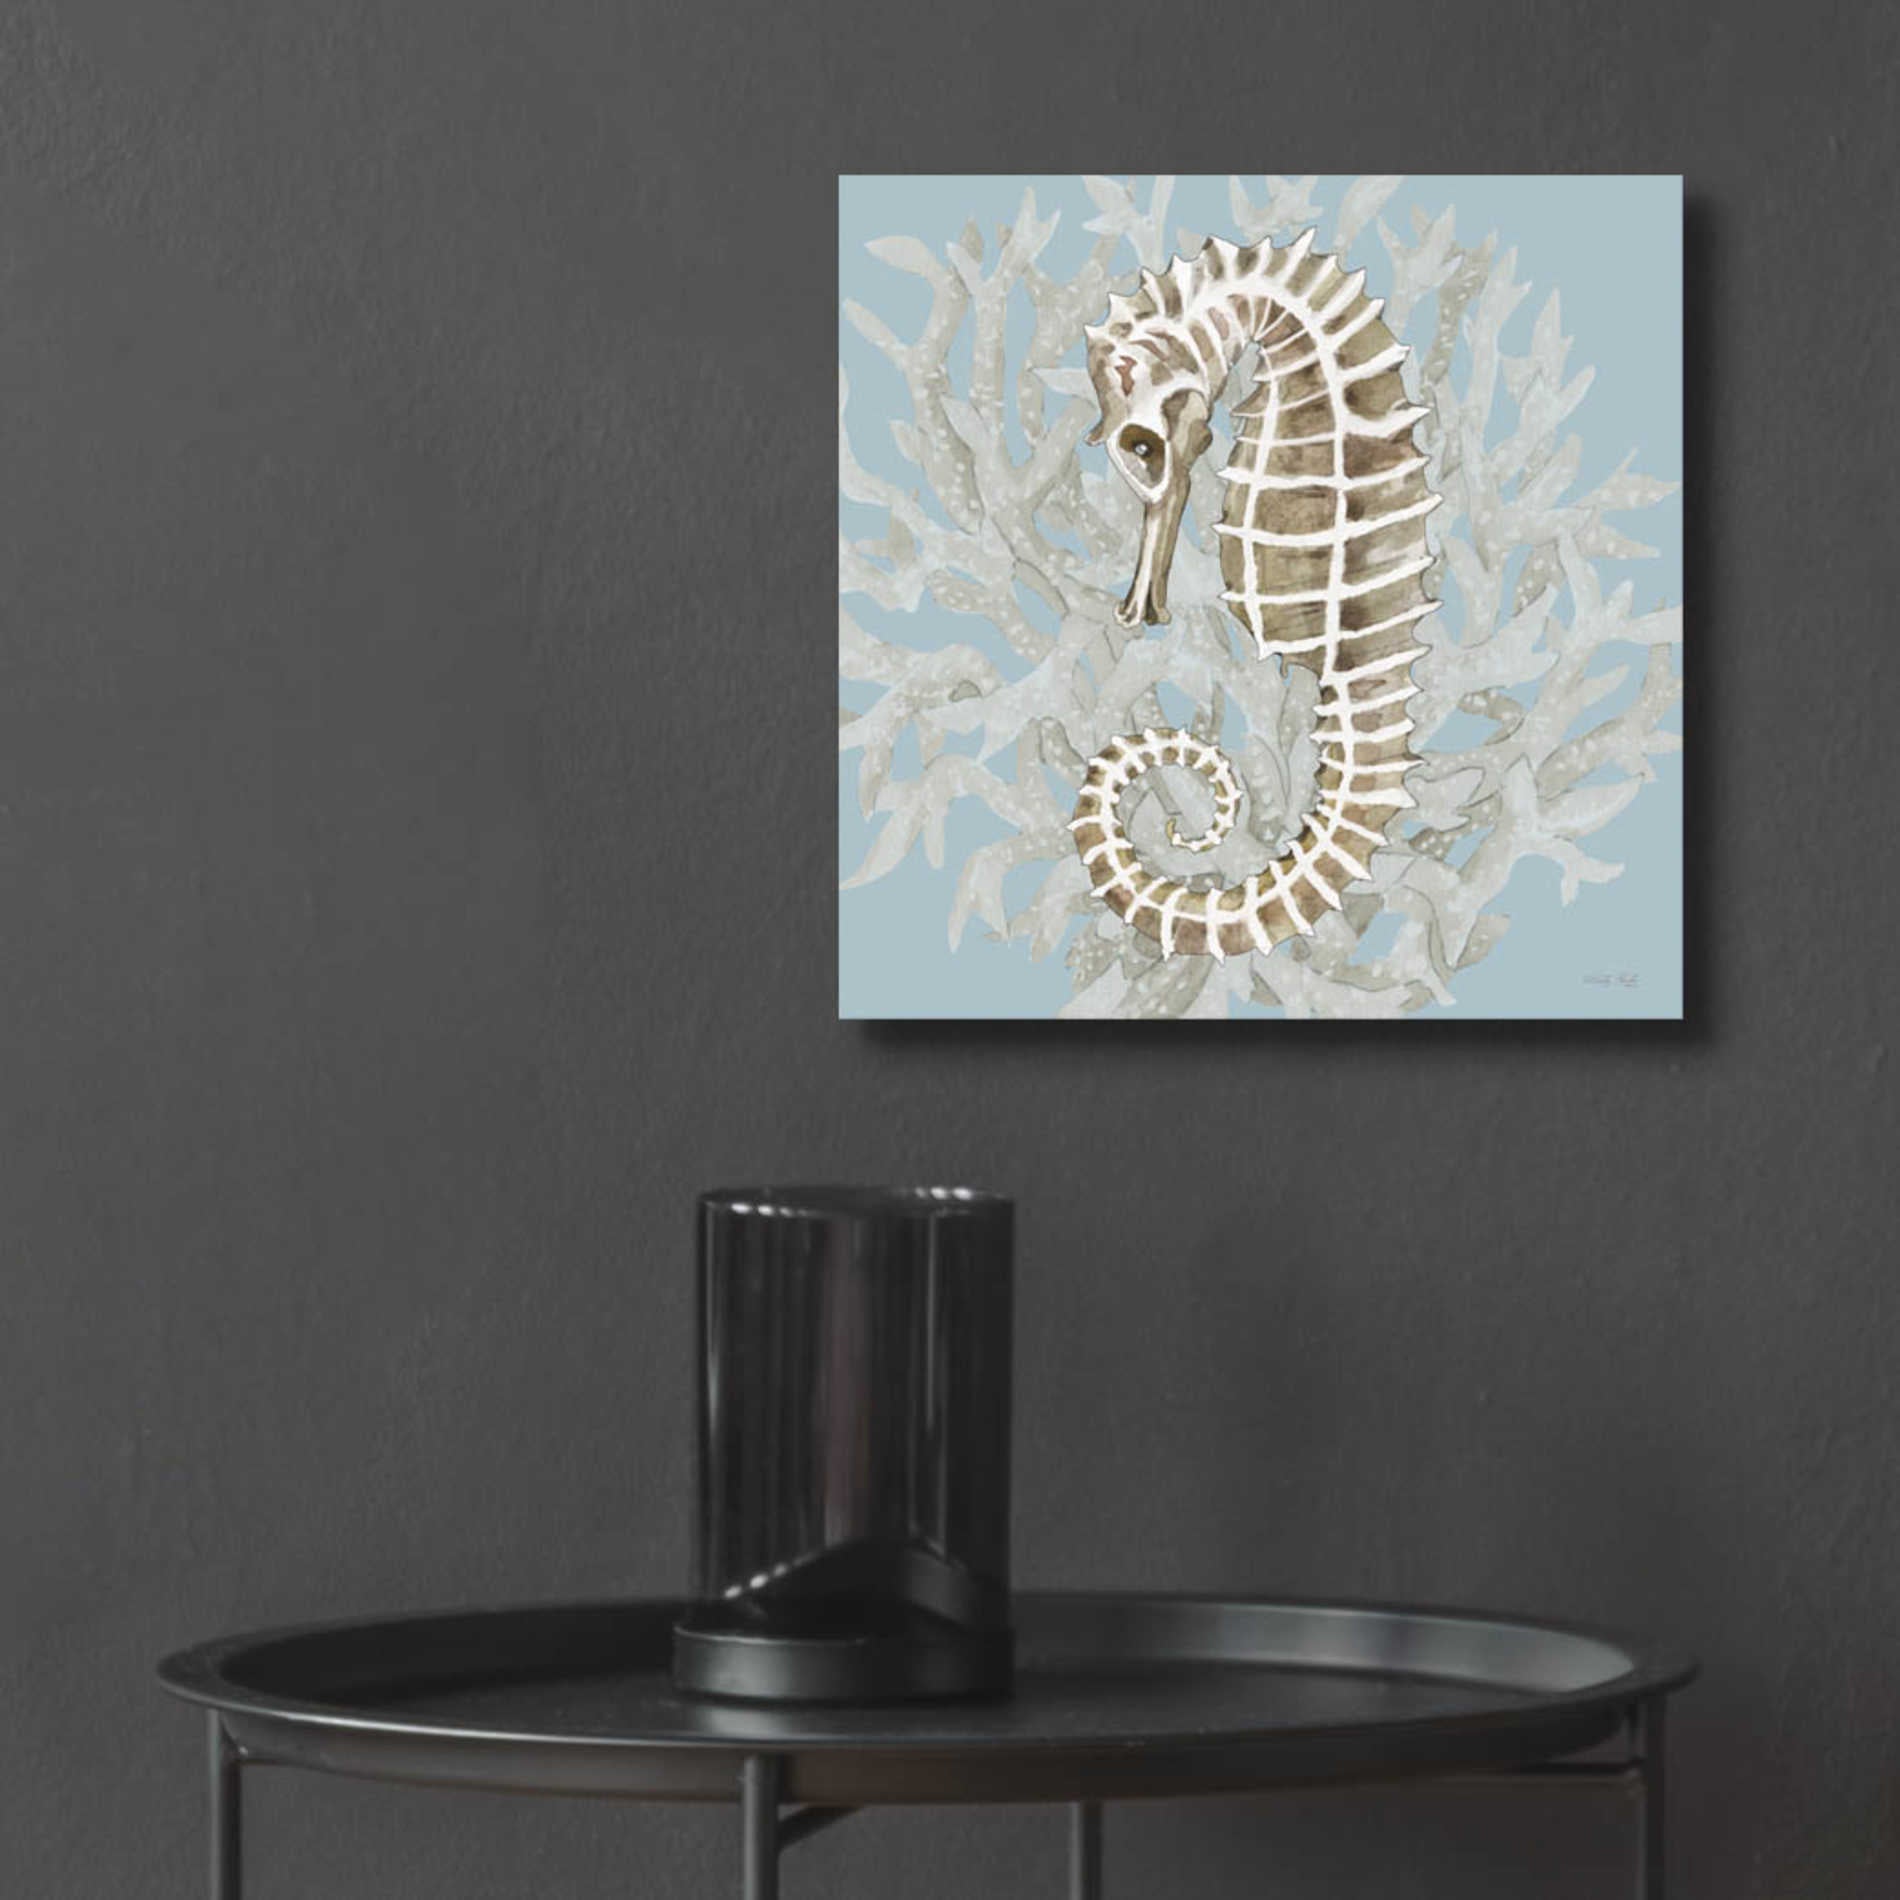 Epic Art 'Coral Seahorse II' by Cindy Jacobs, Acrylic Glass Wall Art,12x12